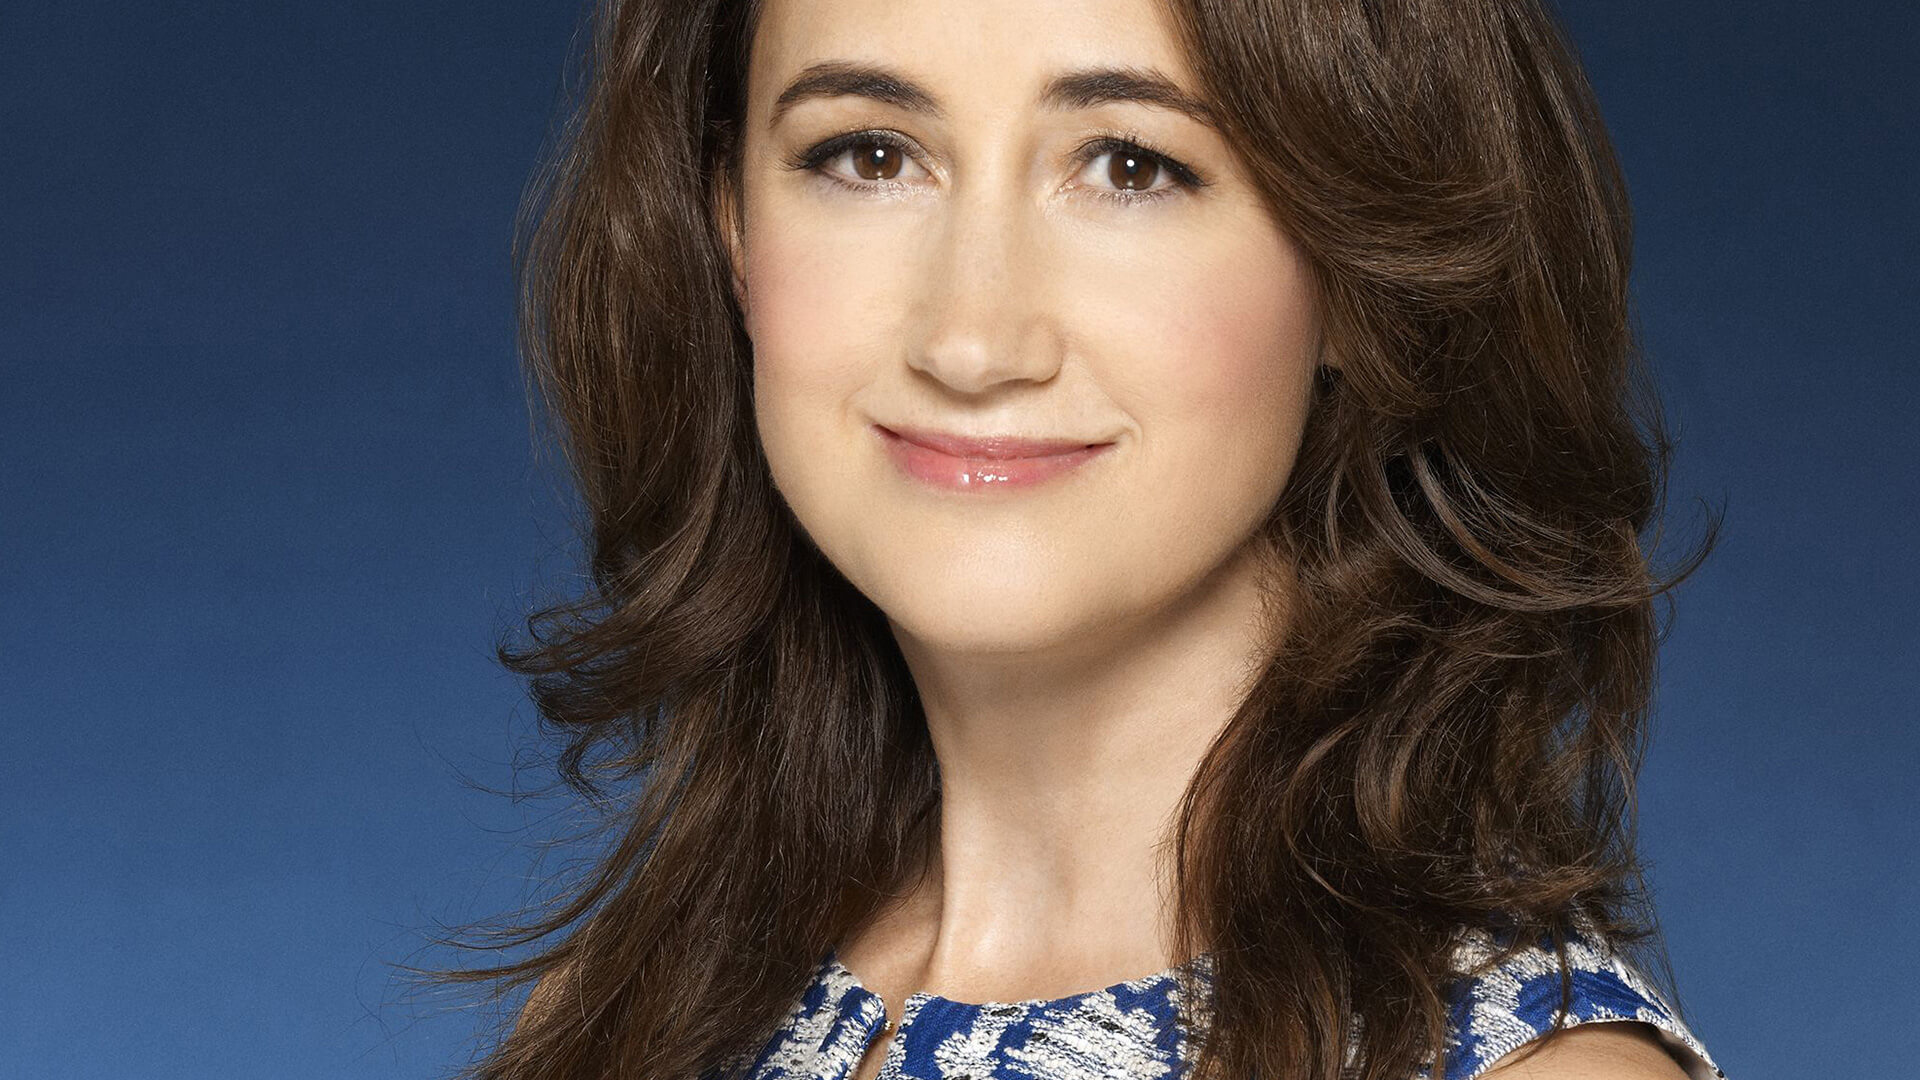 The Bookseller - News - Sophie Kinsella reveals brain cancer diagnosis